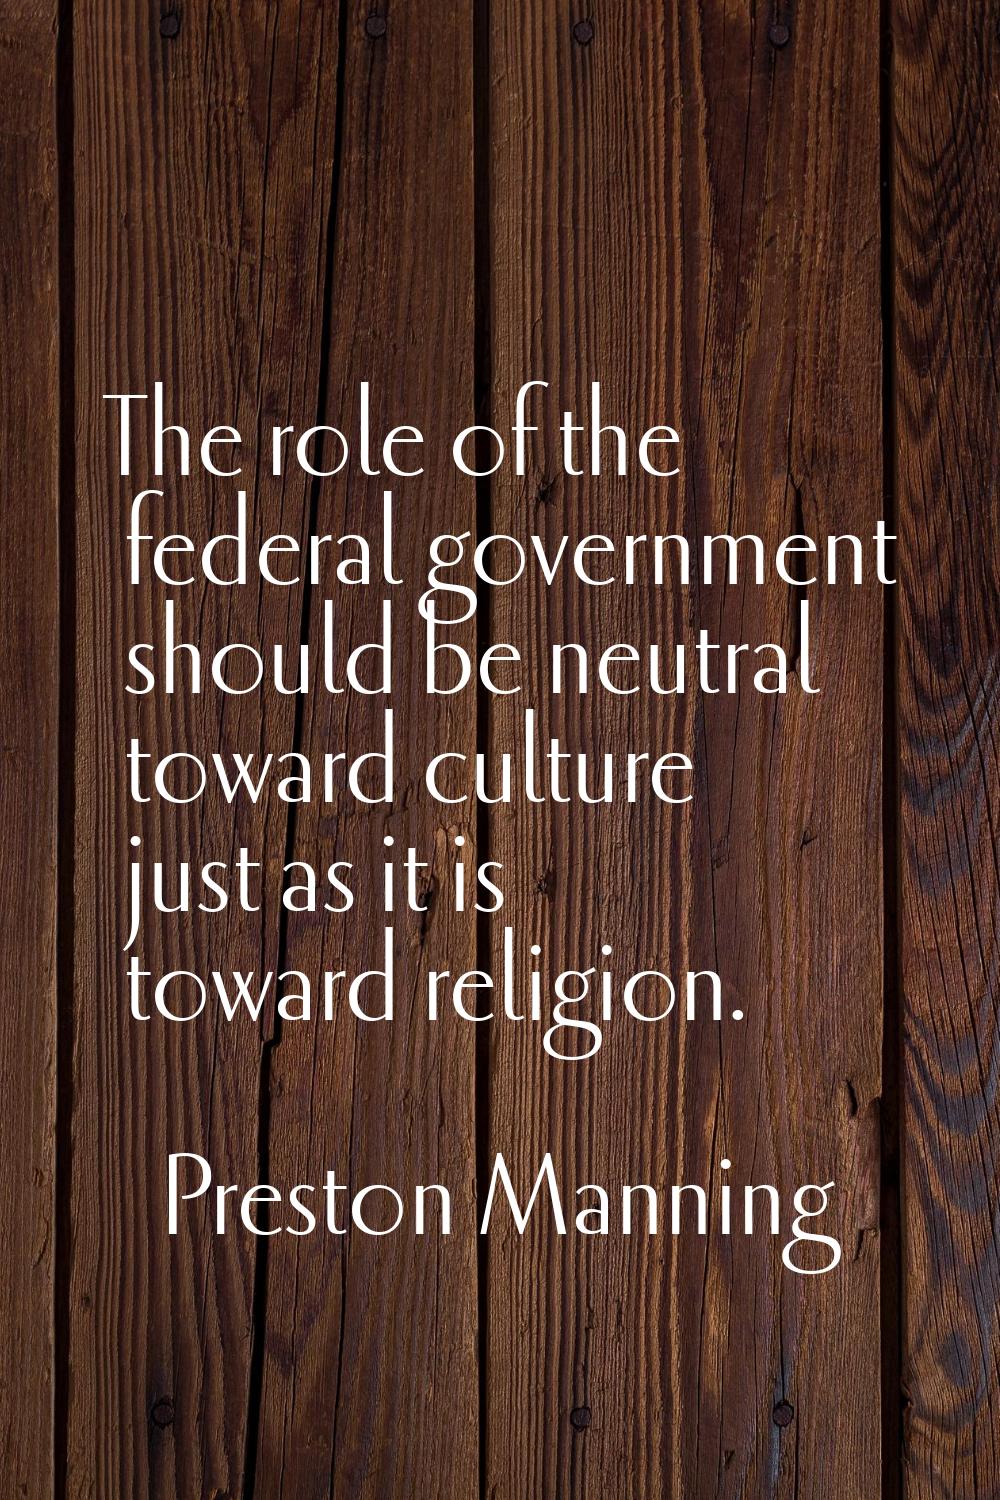 The role of the federal government should be neutral toward culture just as it is toward religion.